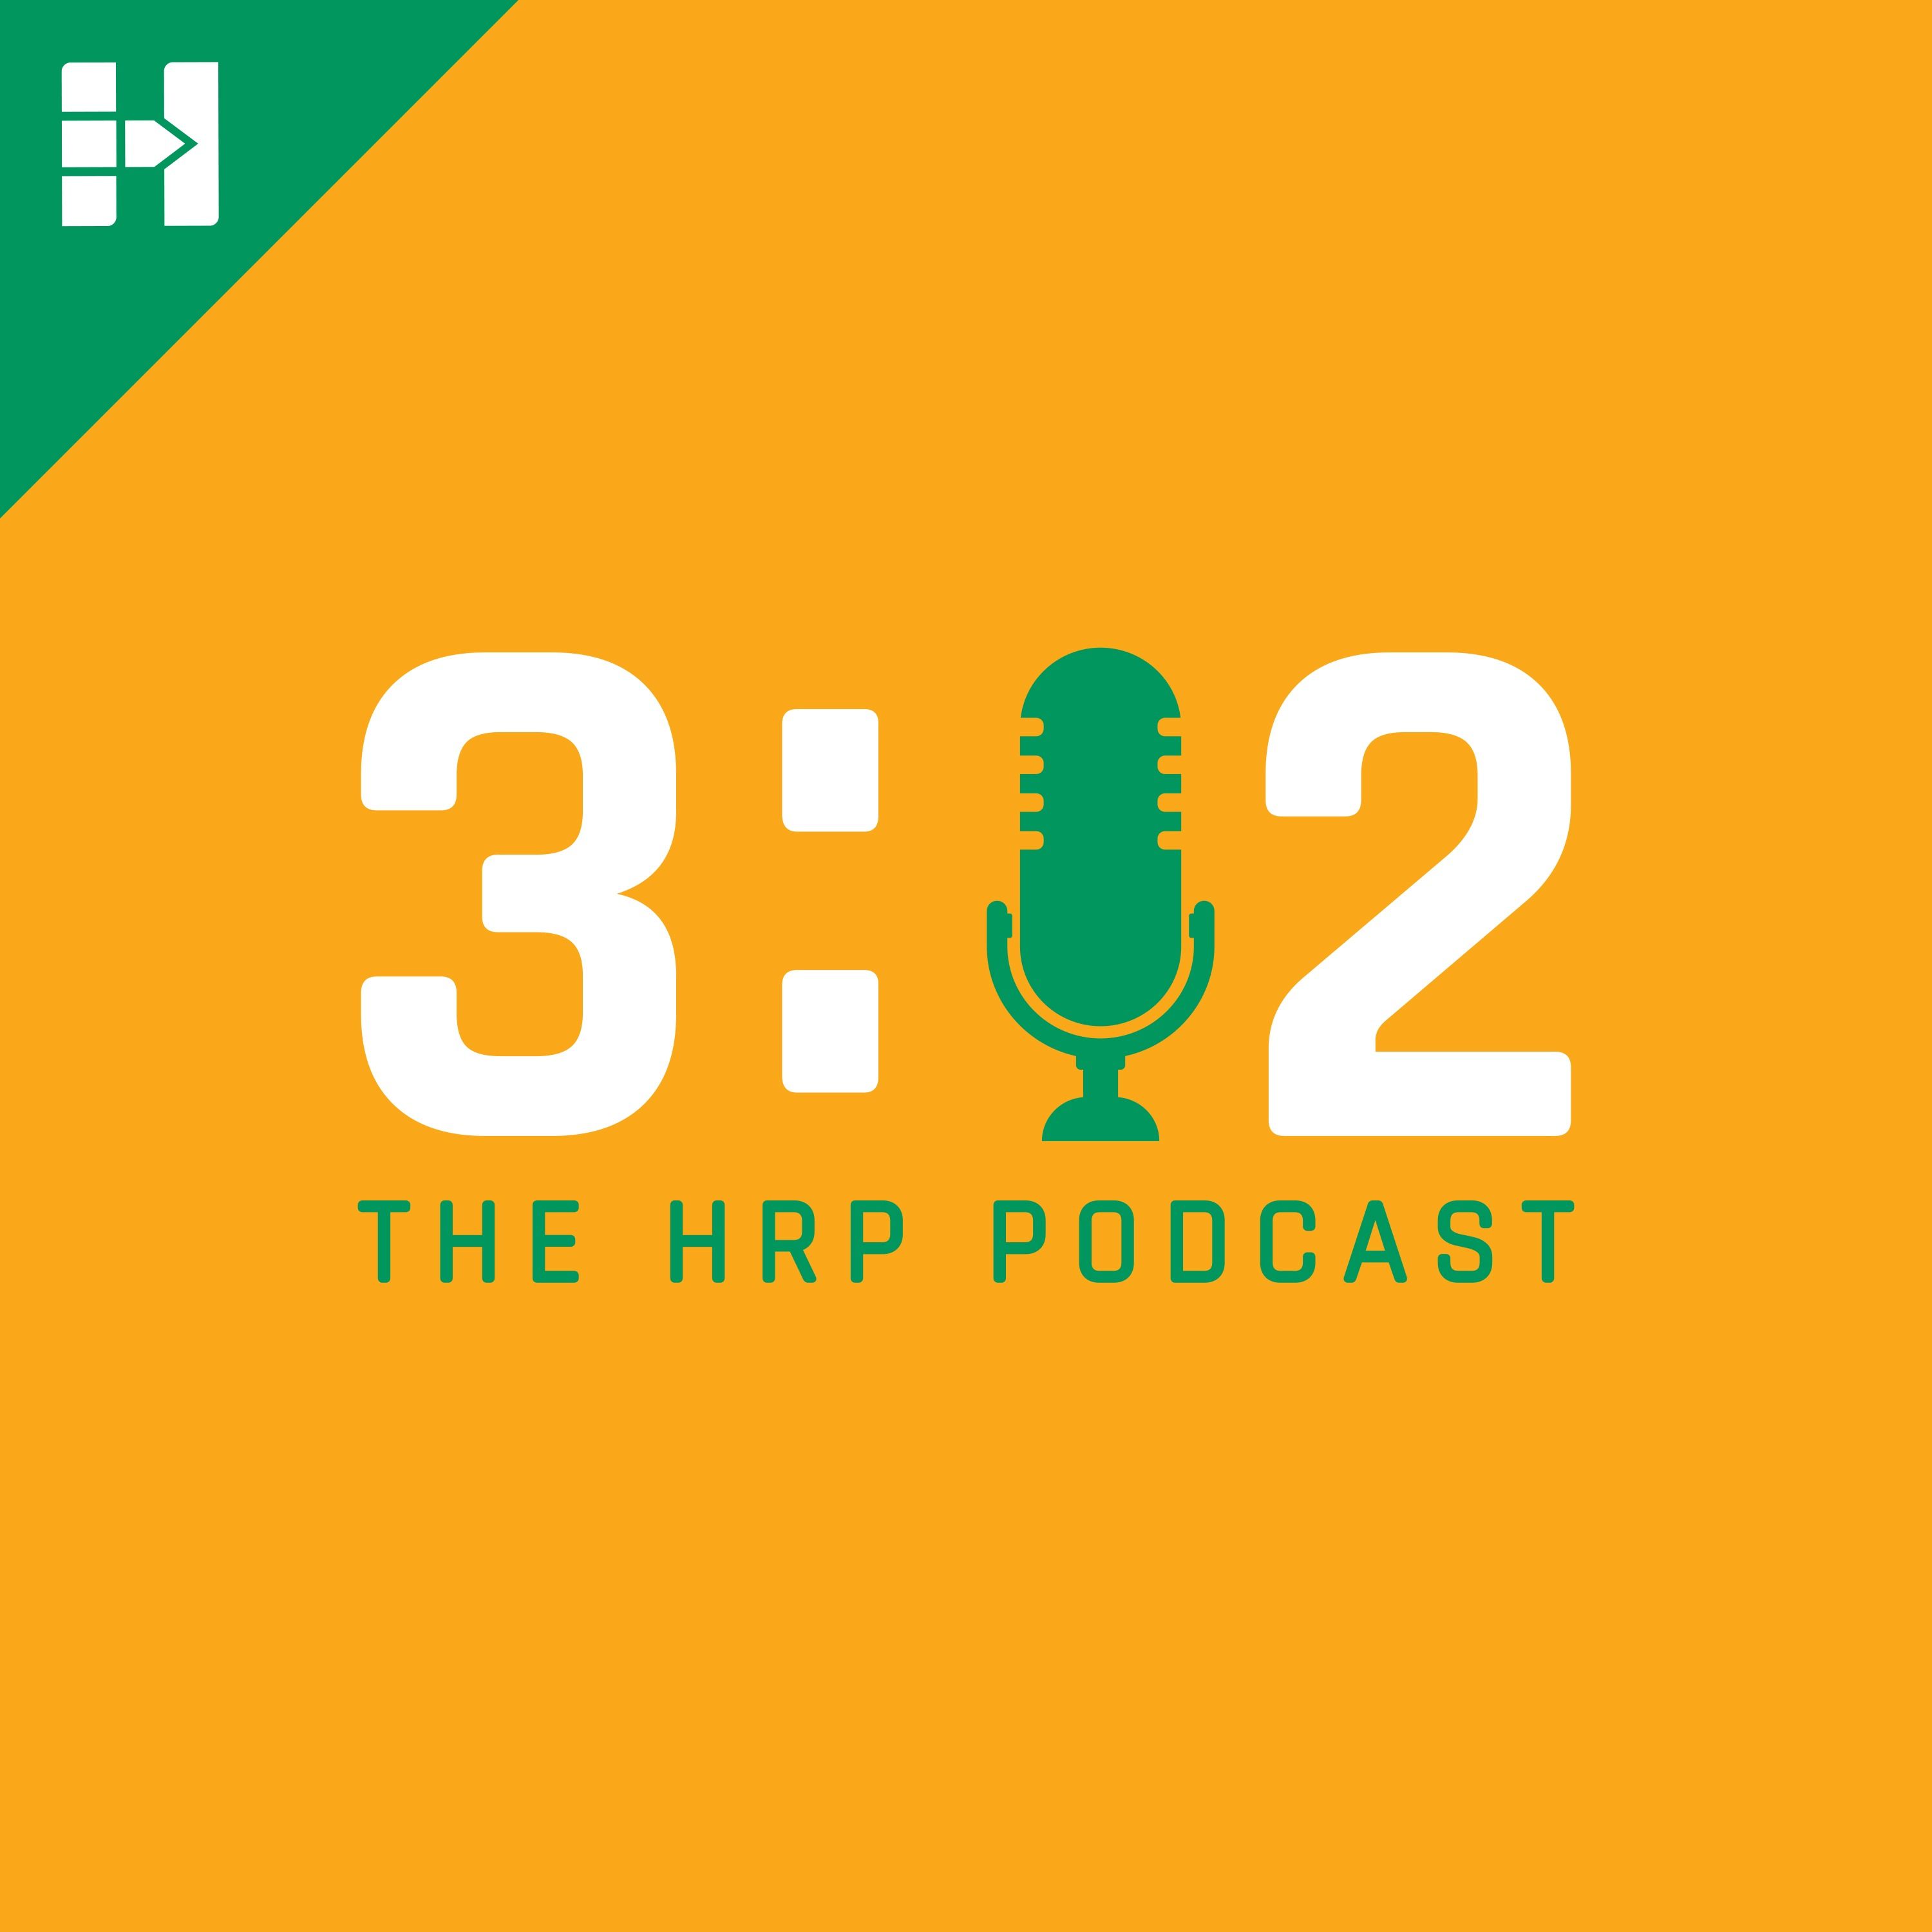 3:12 - The HRP Podcast, Episode 36: What's the Good WERG